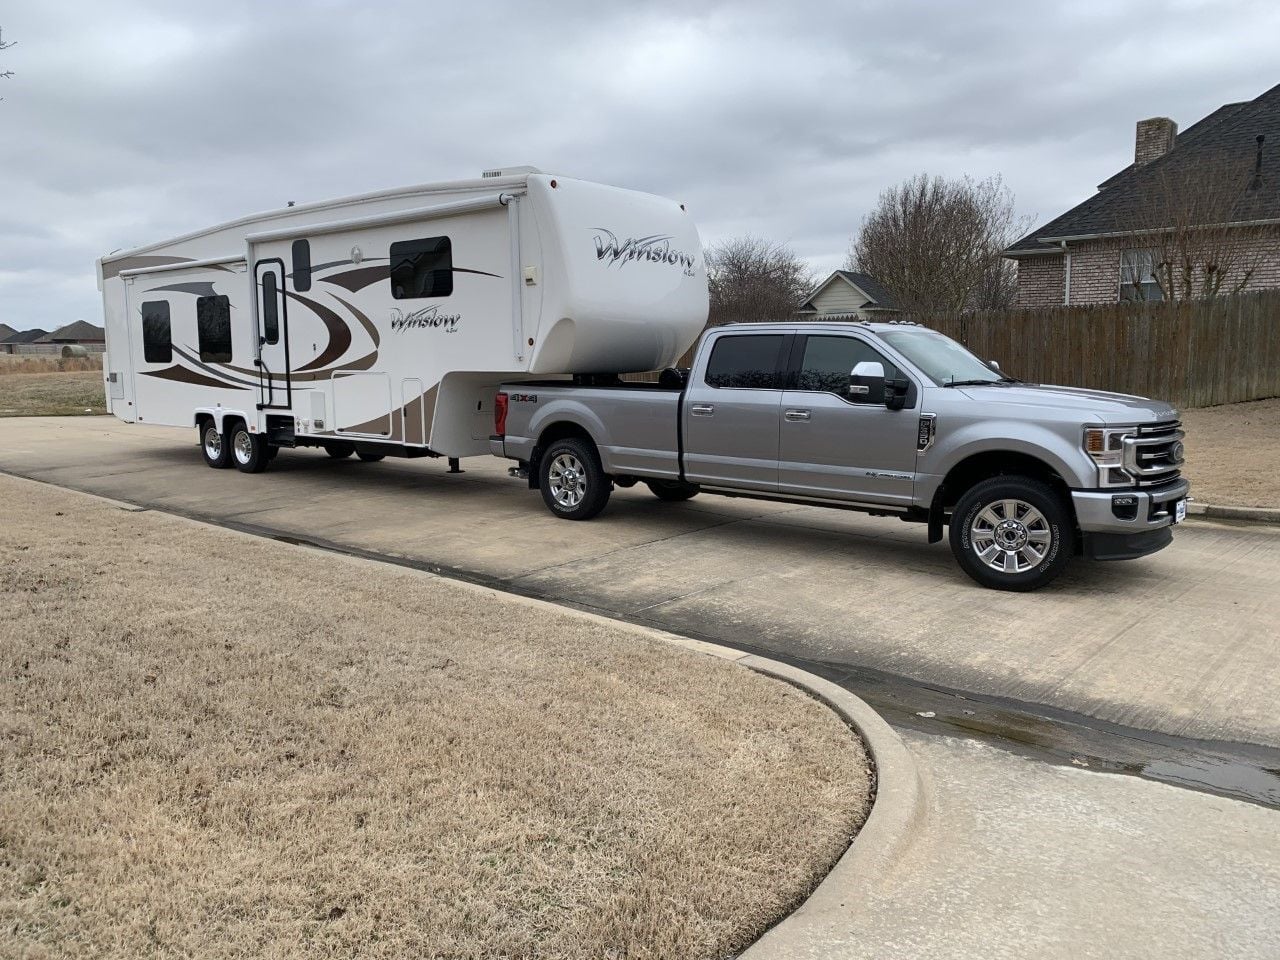 Picked up our fifth wheel with Goosebox - 2020 DRW - Ford Truck ...